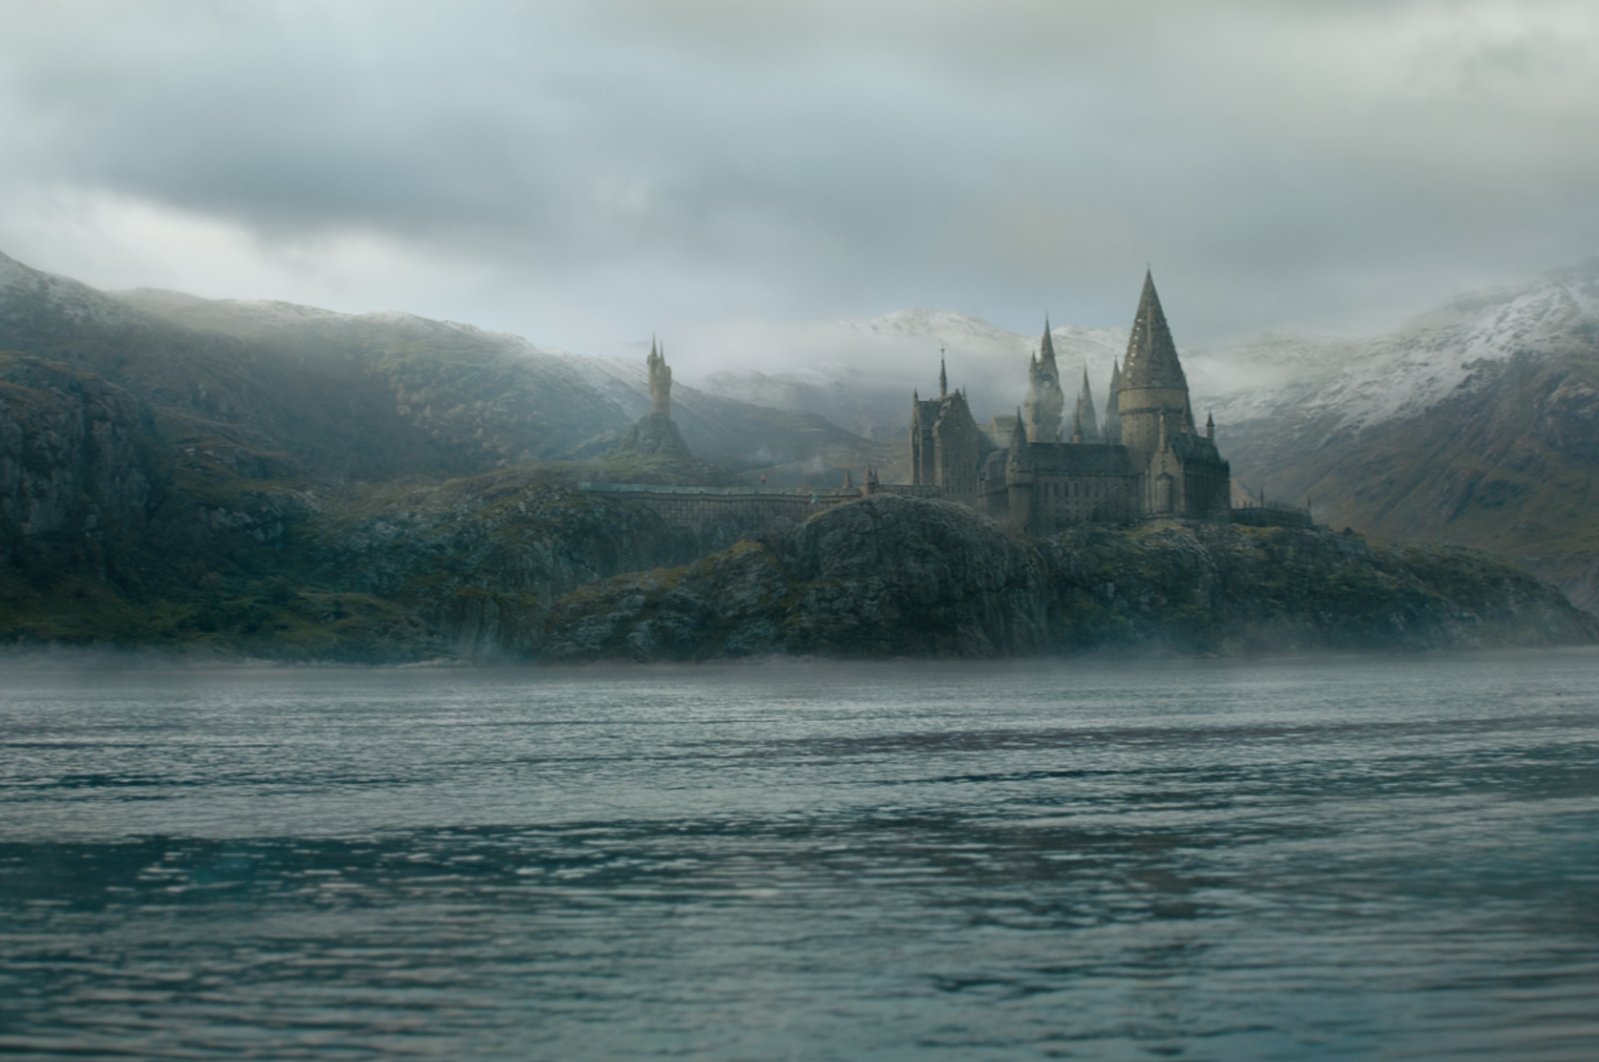 Hogwarts from a scene &quot;Fantastic Beasts: The Secrets of Dumbledore,&quot; April 15, 2022. (Photo courtesy of Warner Bros Pictures)